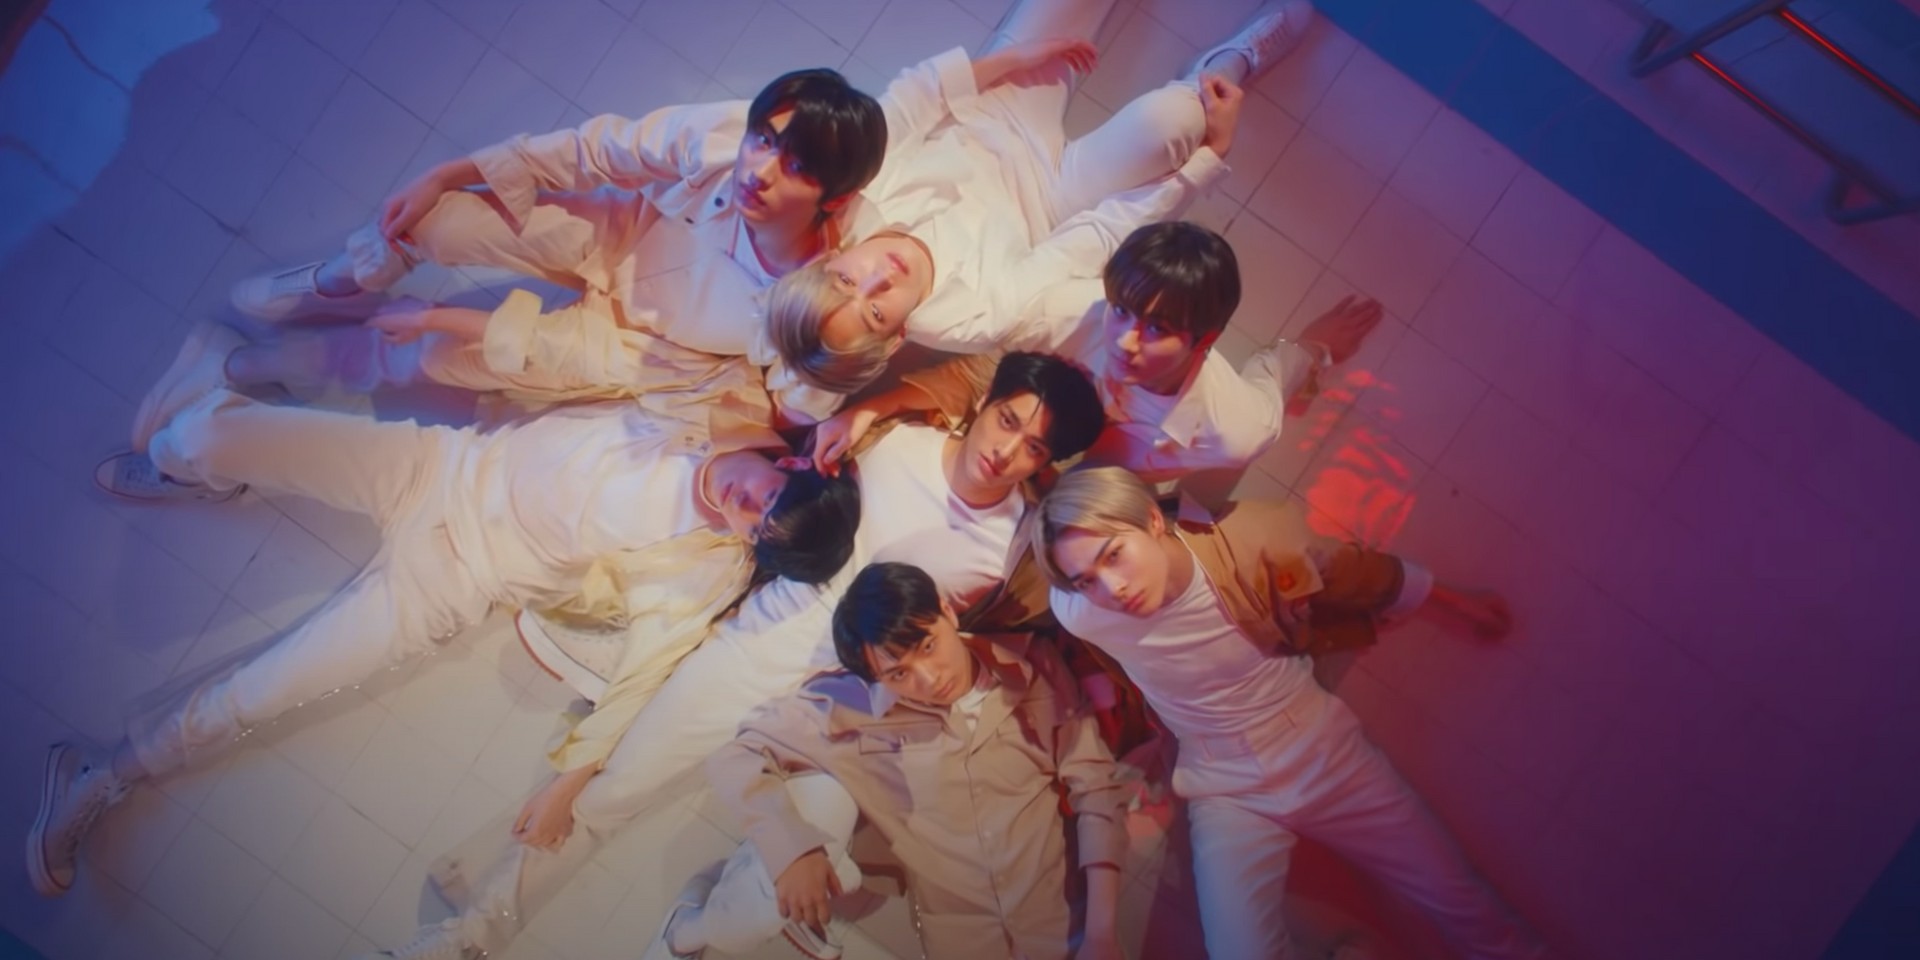 ENHYPEN move through different worlds in 'FEVER' music video – watch